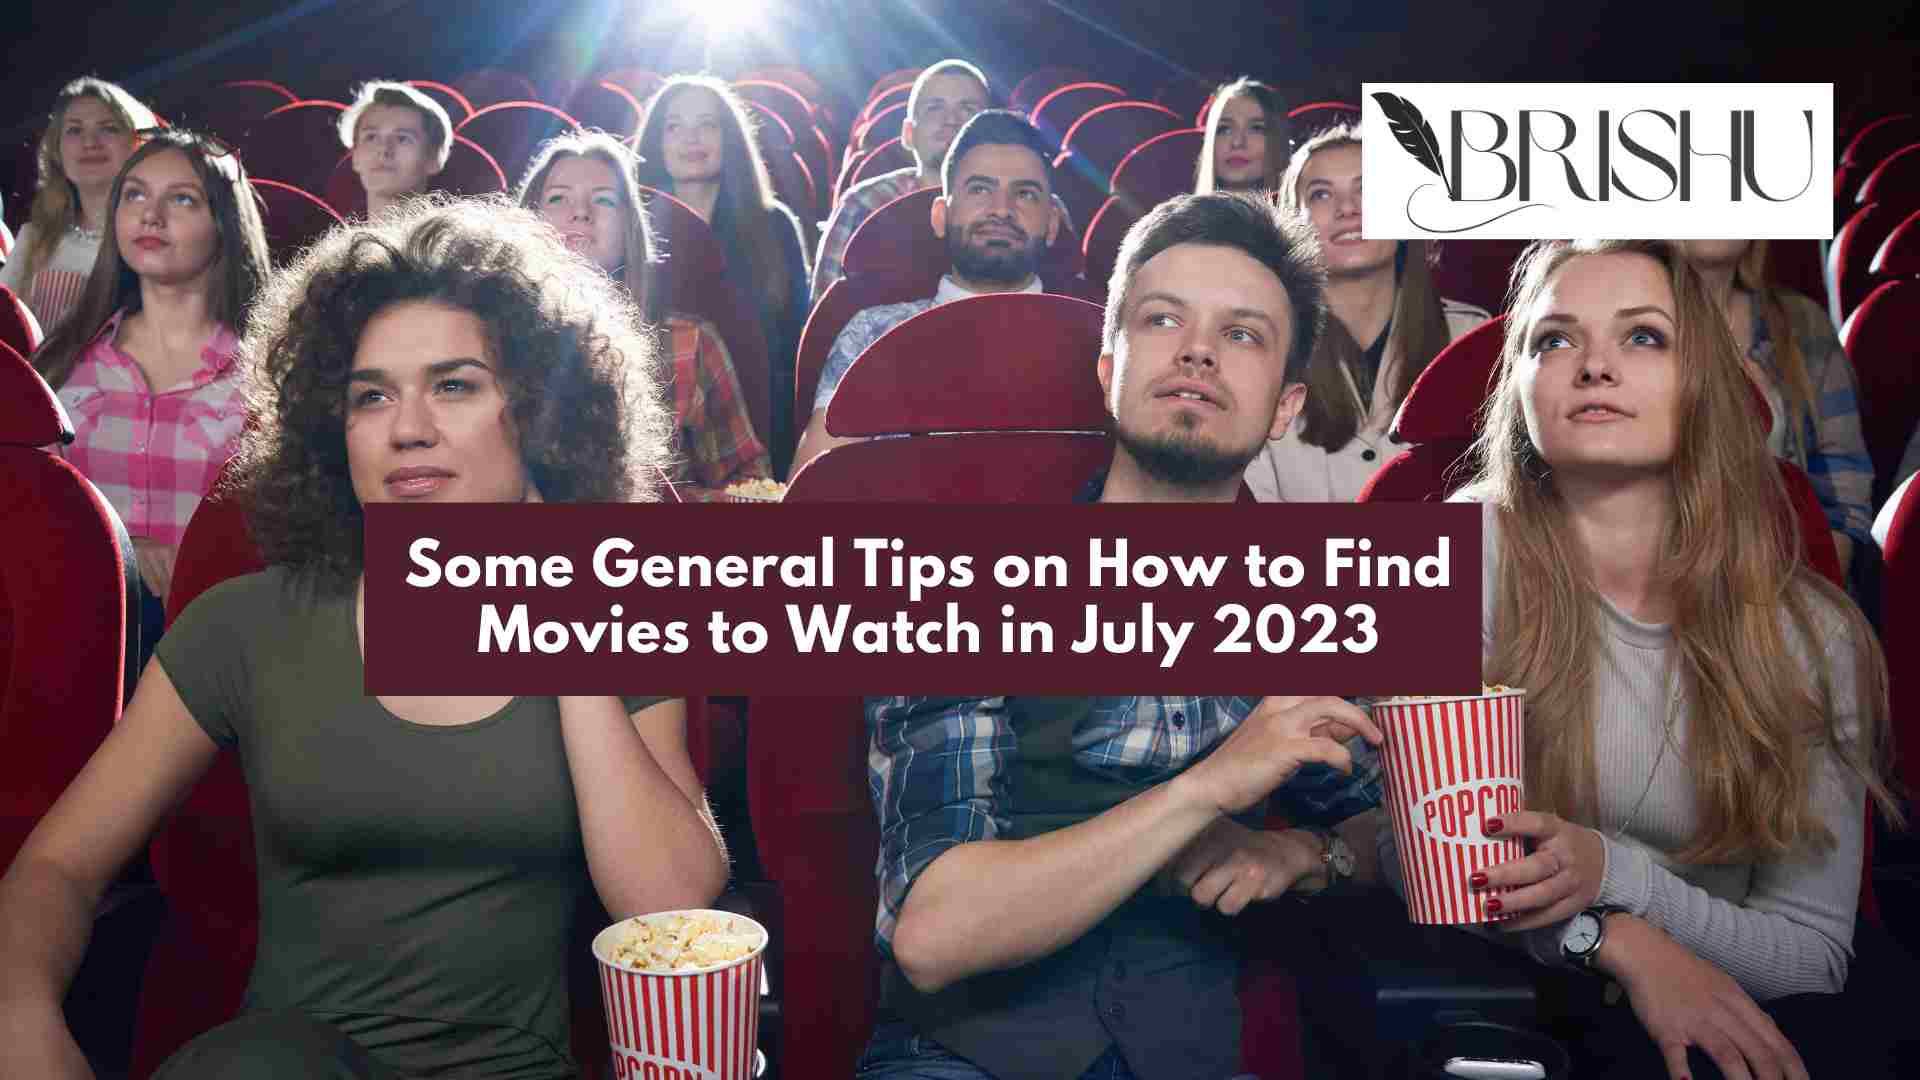 <strong>Some General Tips on How to Find Movies to Watch in July 2023</strong>